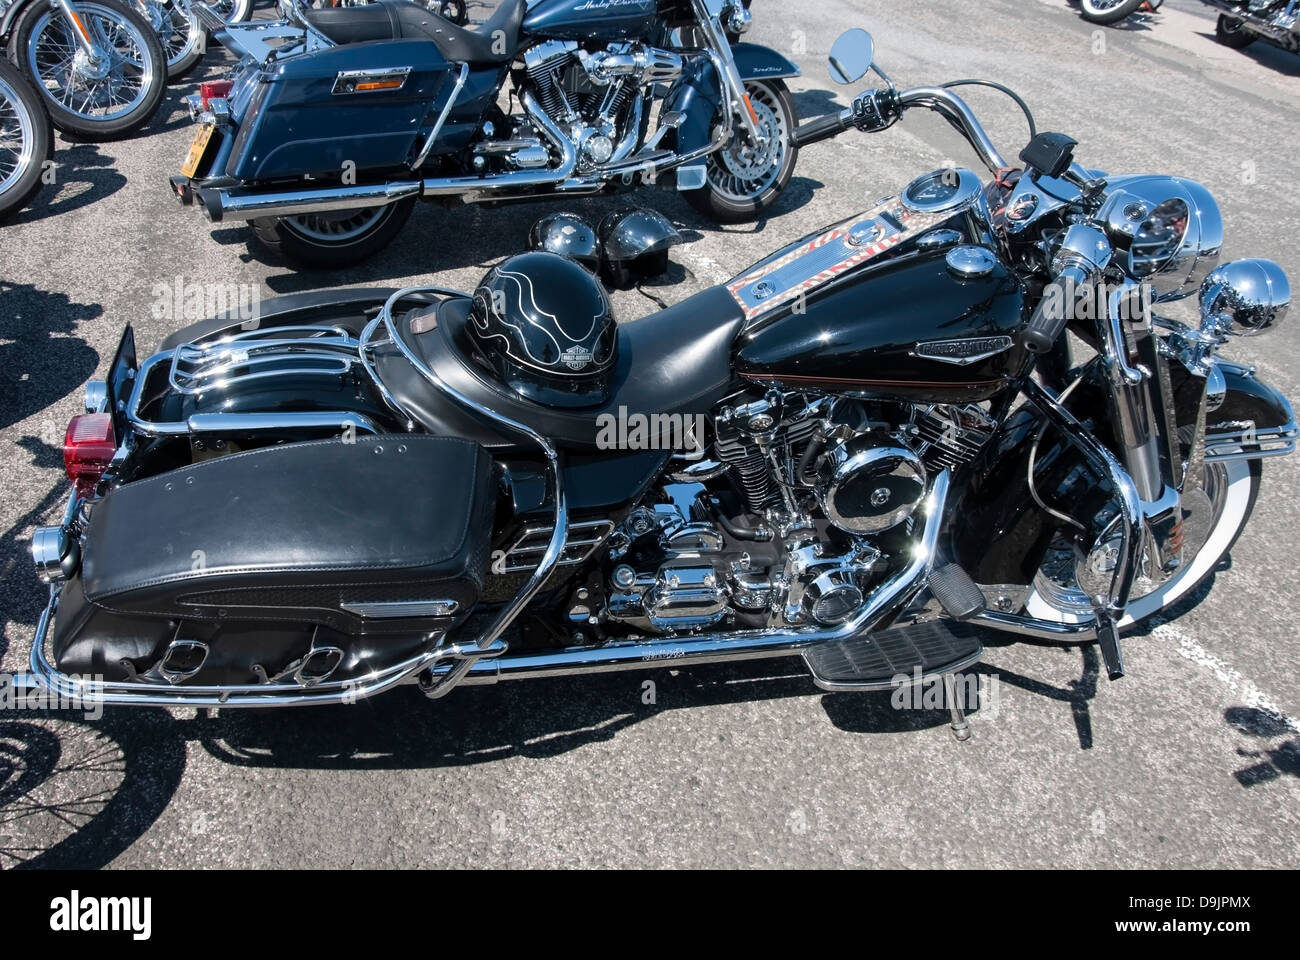 Page 3 Harley Owners Group High Resolution Stock Photography And Images Alamy